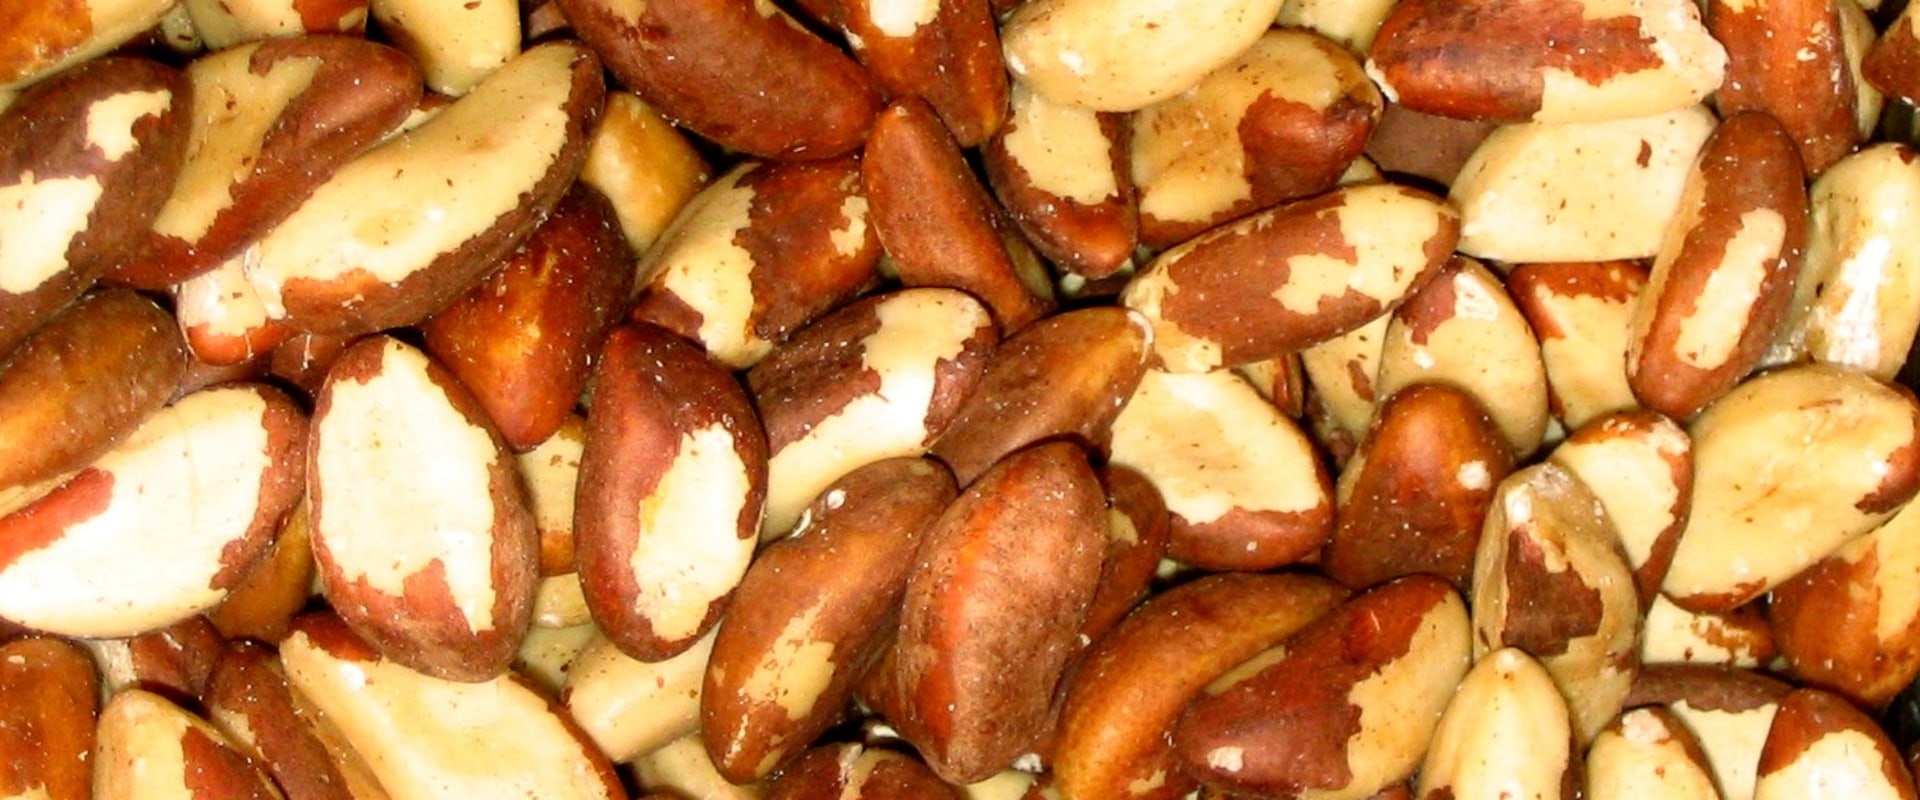 Why are brazil nuts so expensive?